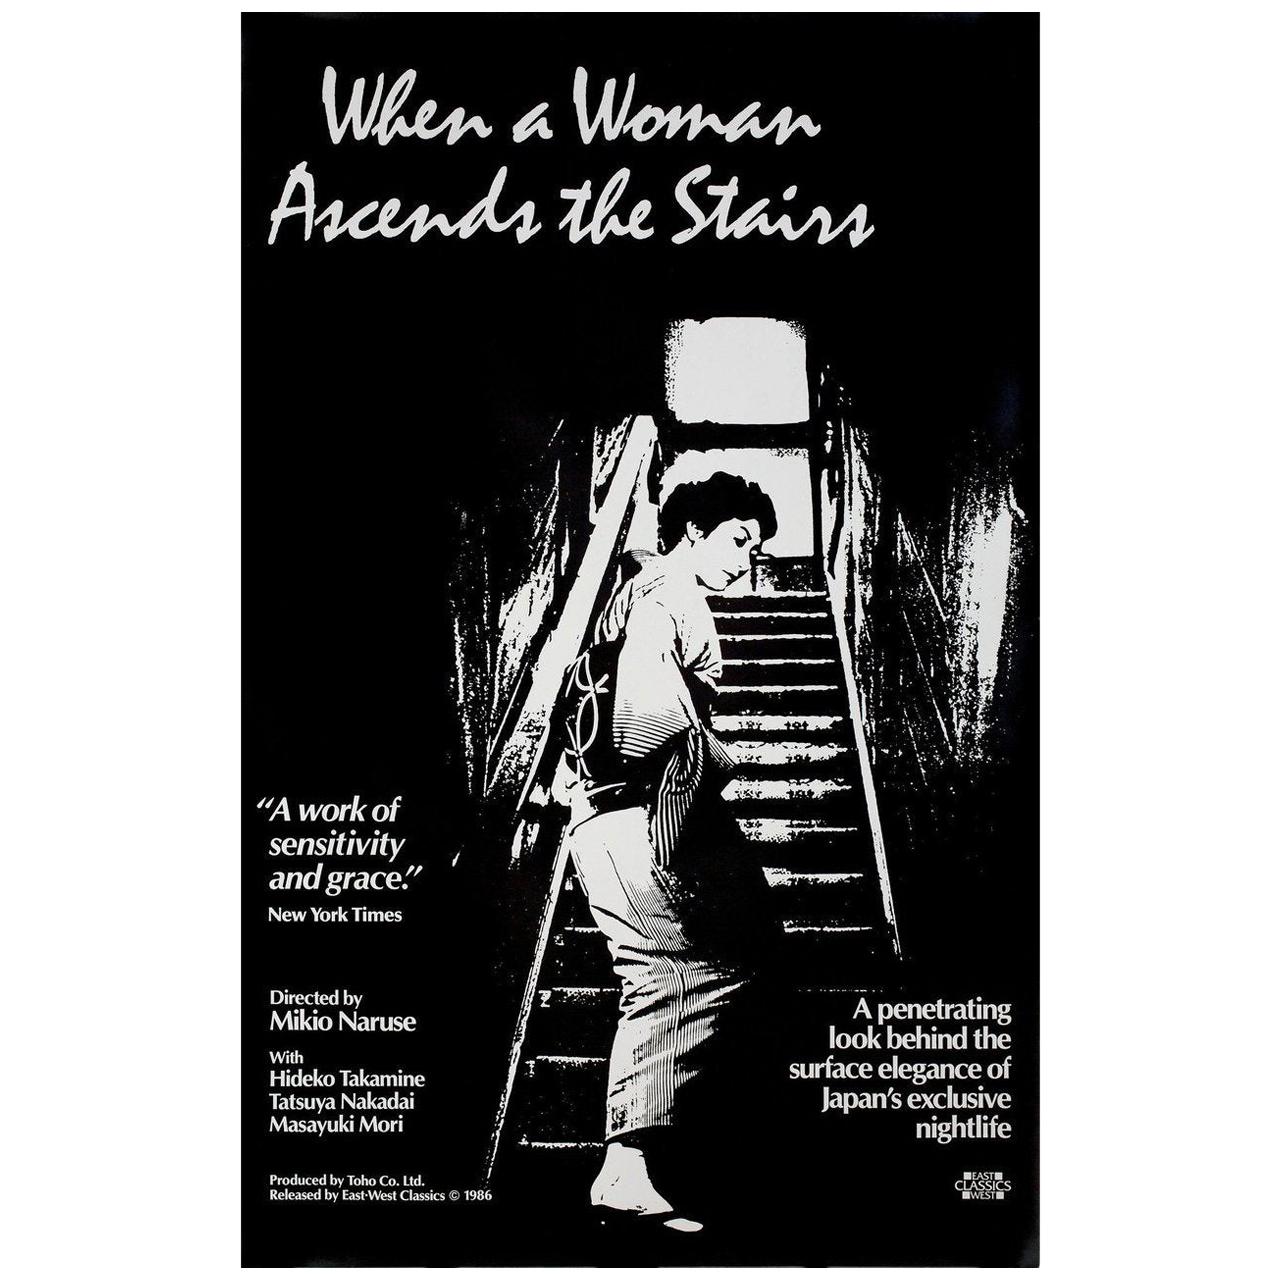 "When a Woman Ascends the Stairs" R1986 U.S. Film Poster